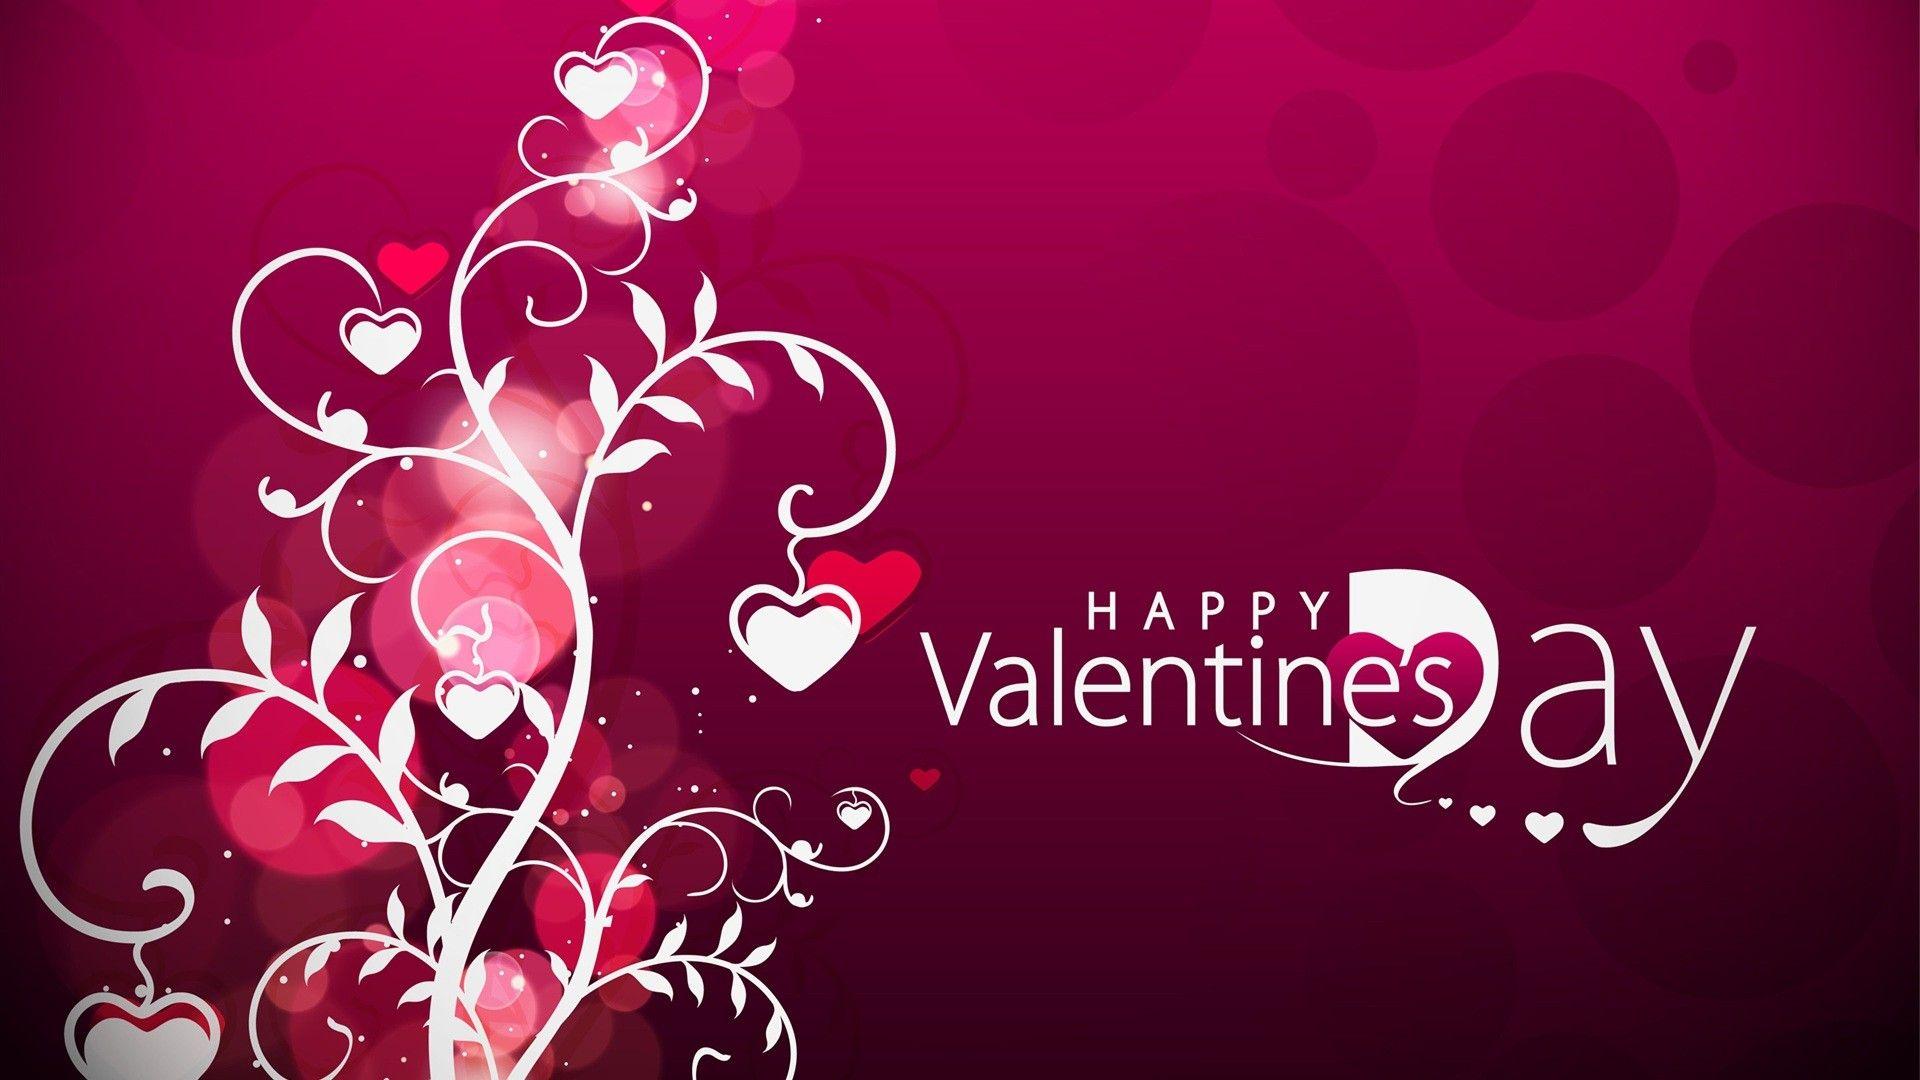 Valentines Day Wallpaper HD. Zem Wallpaper Is The Best Place